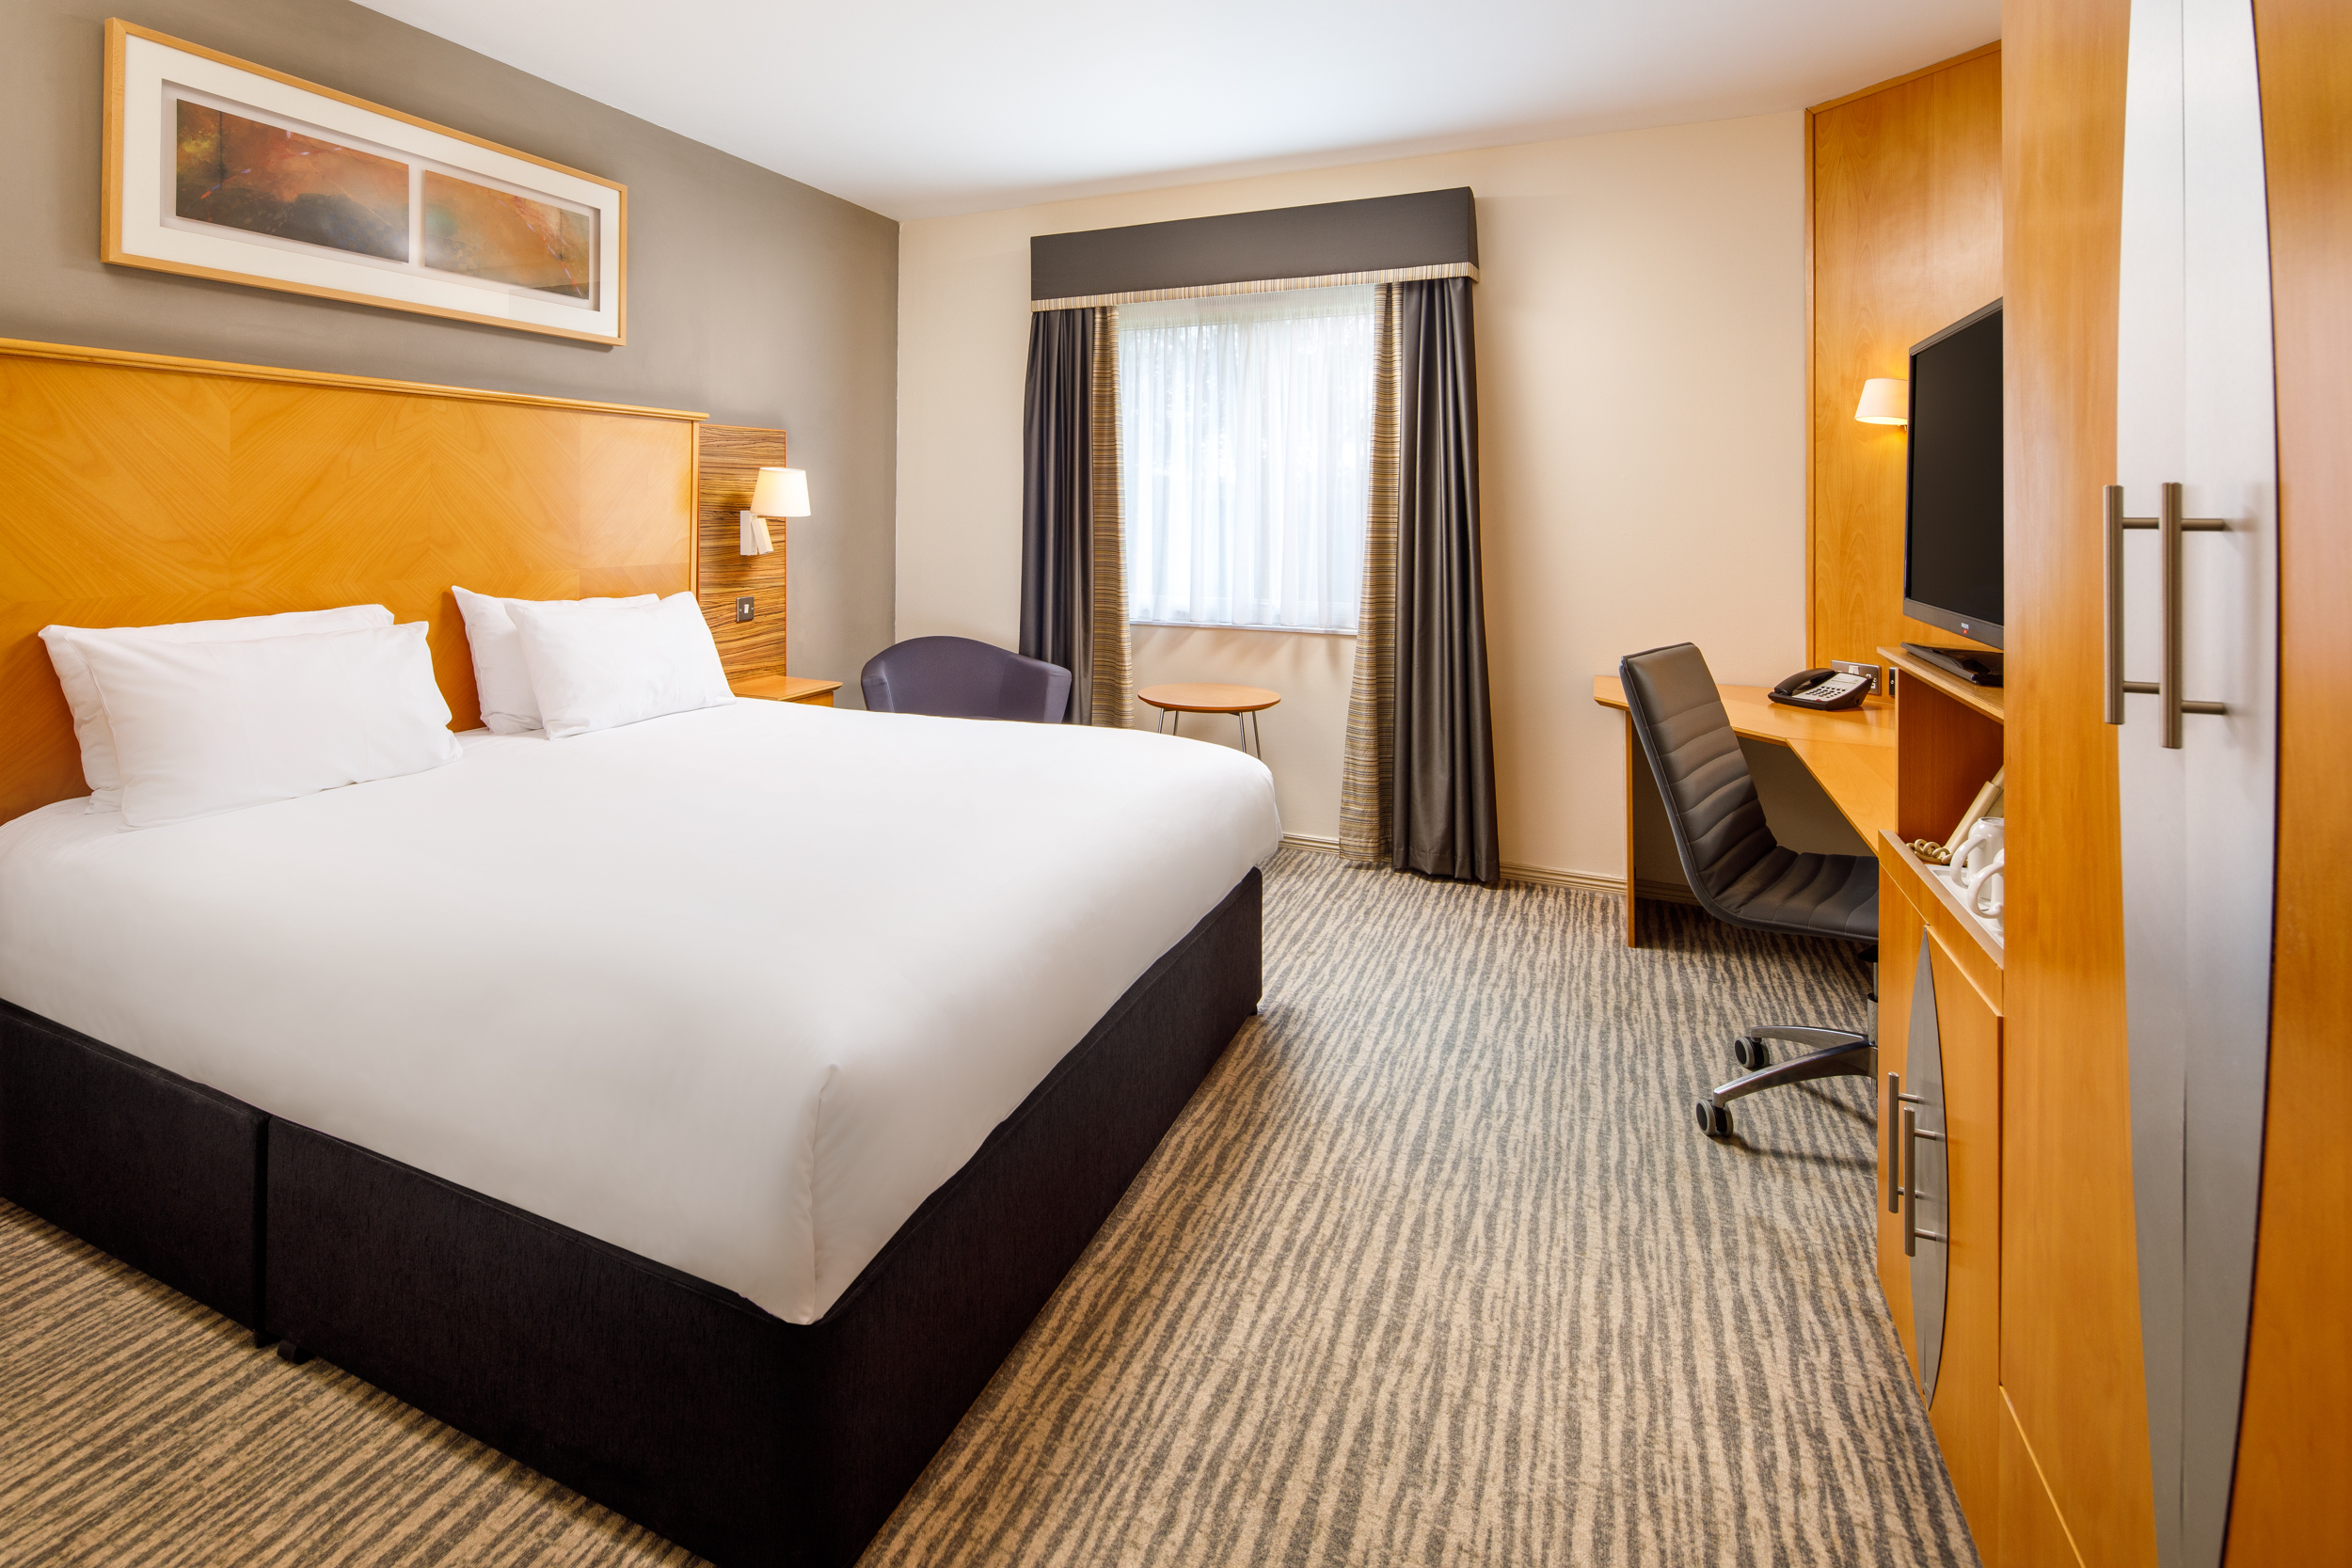 Double bed in a classic bedroom at mercure manchester piccadilly hotel